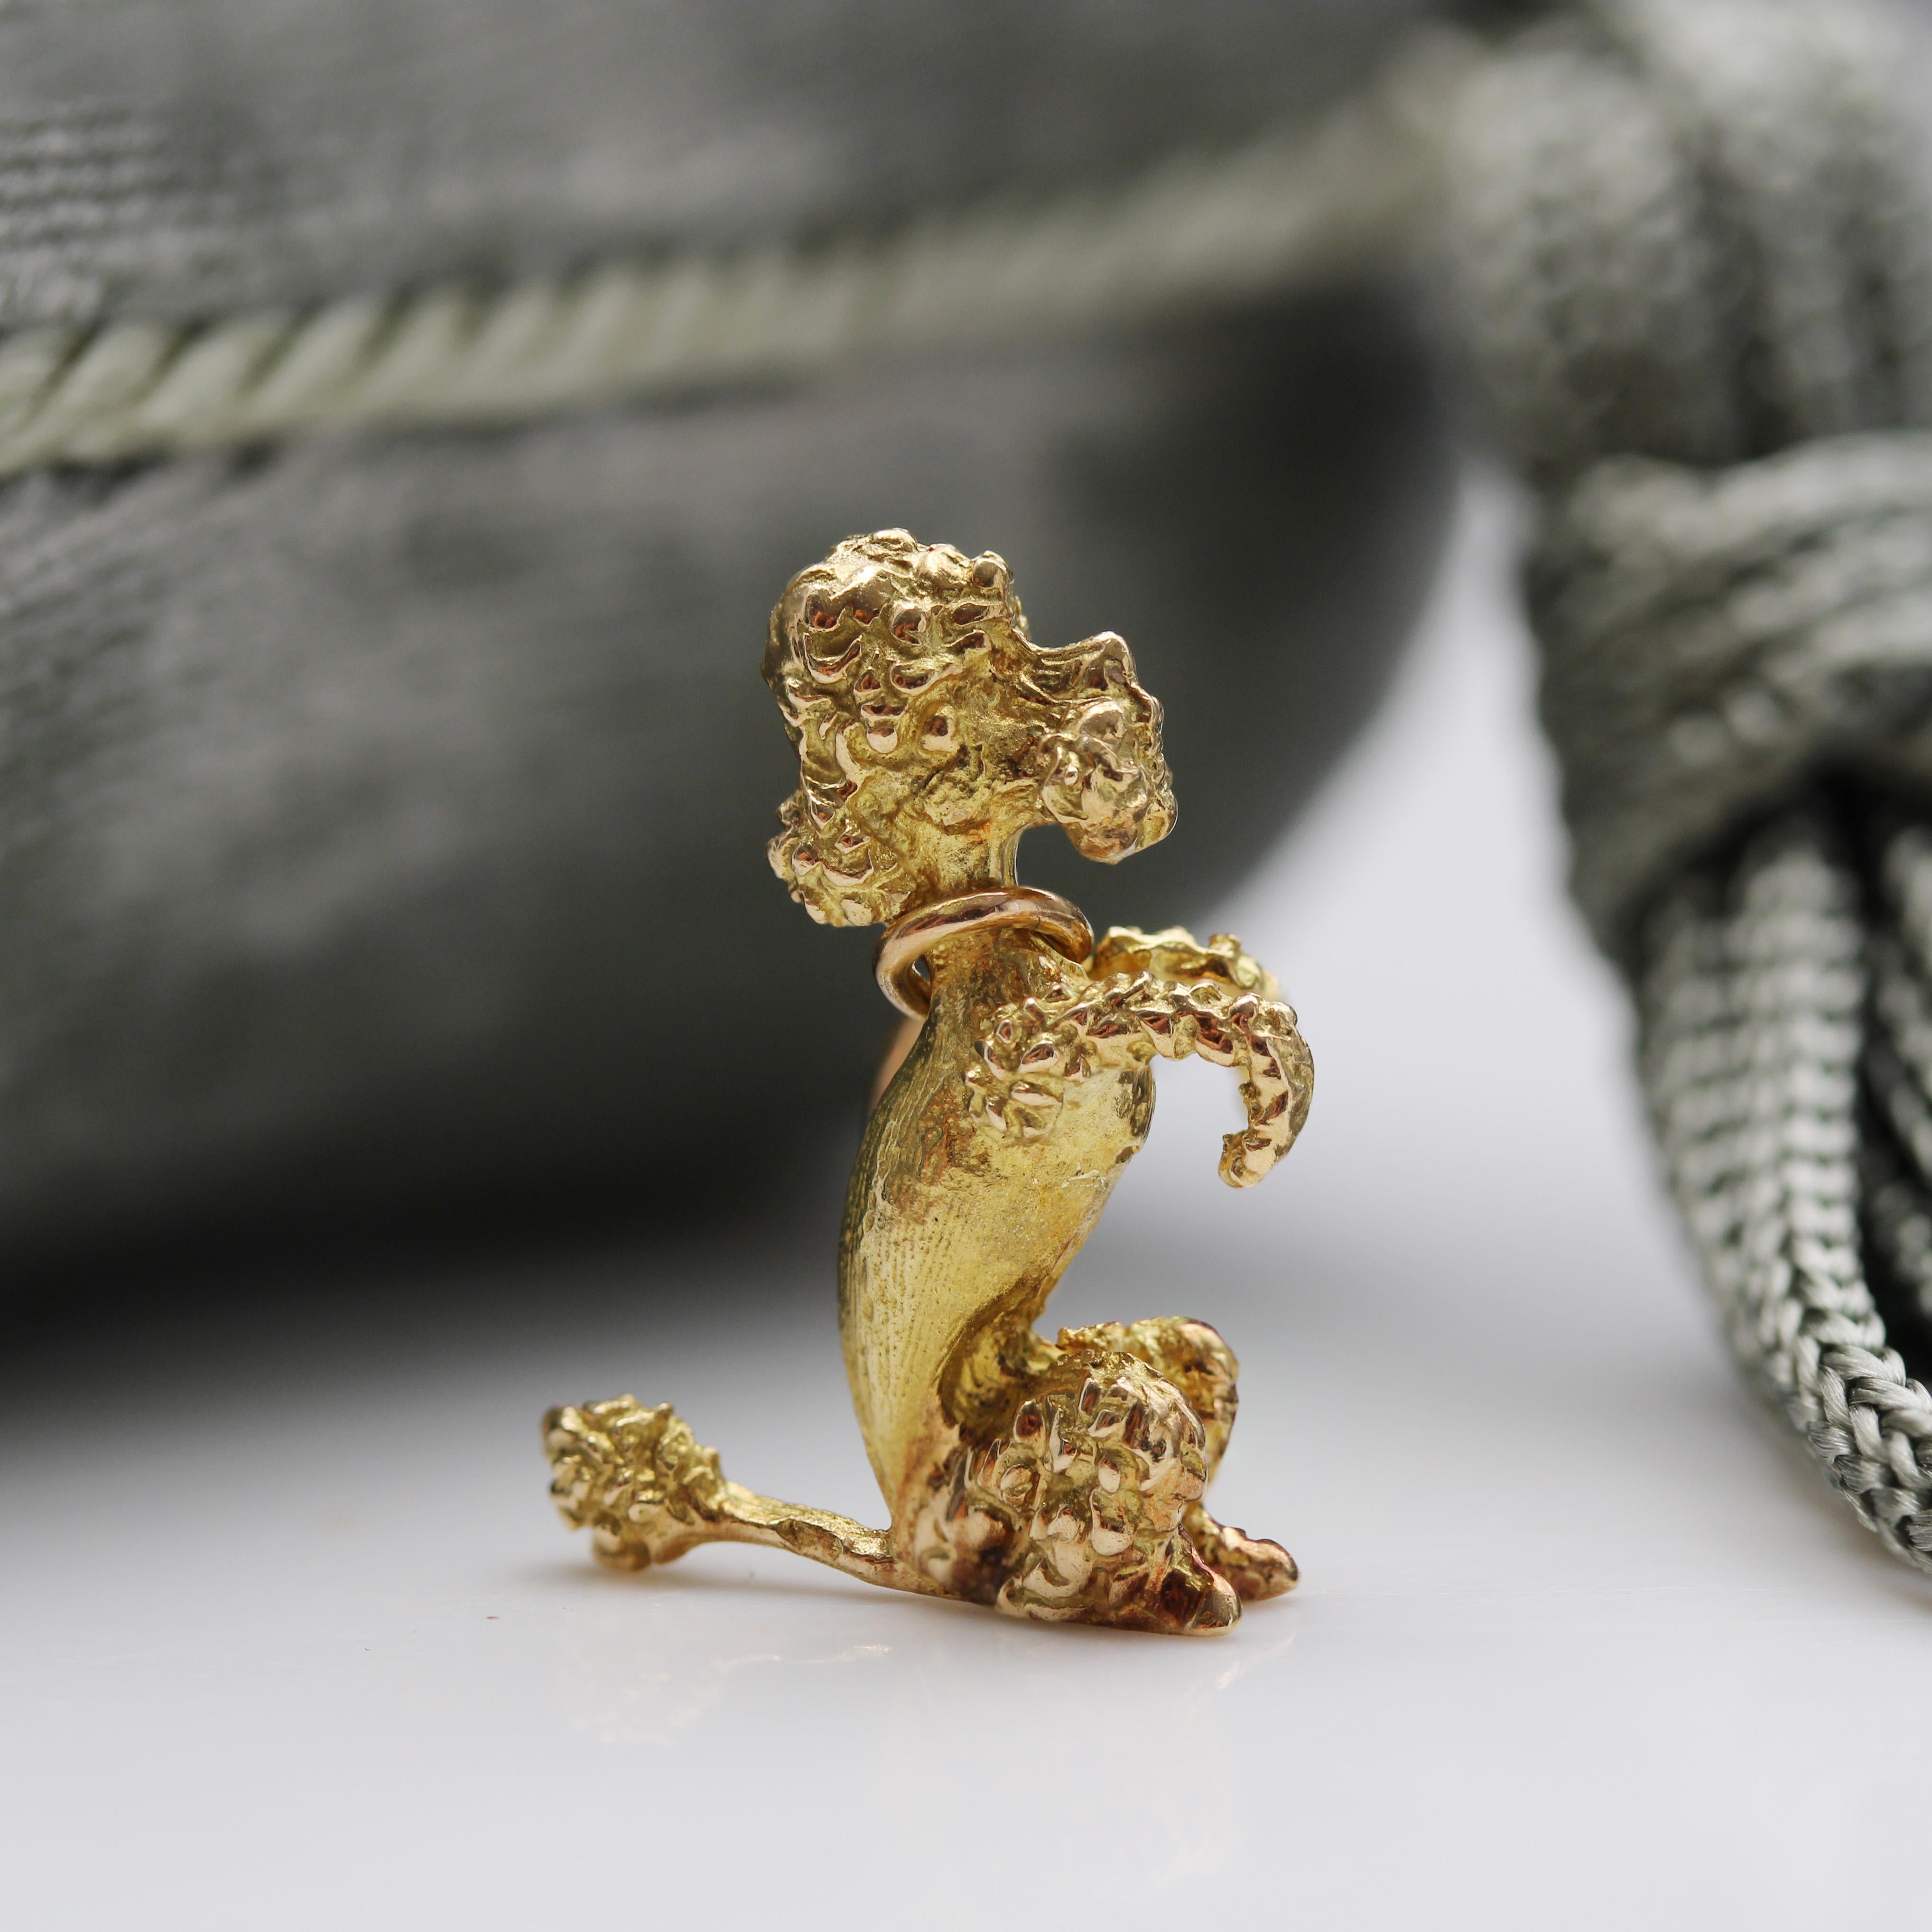 Pendant in 18 karat yellow gold, eagle head hallmark.
Crafted with great finesse and realism, this antique charm depicts a sitting poodle. The charm is held in place by a gold ring twisted around its neck.
Pendant sold alone, without its chain of